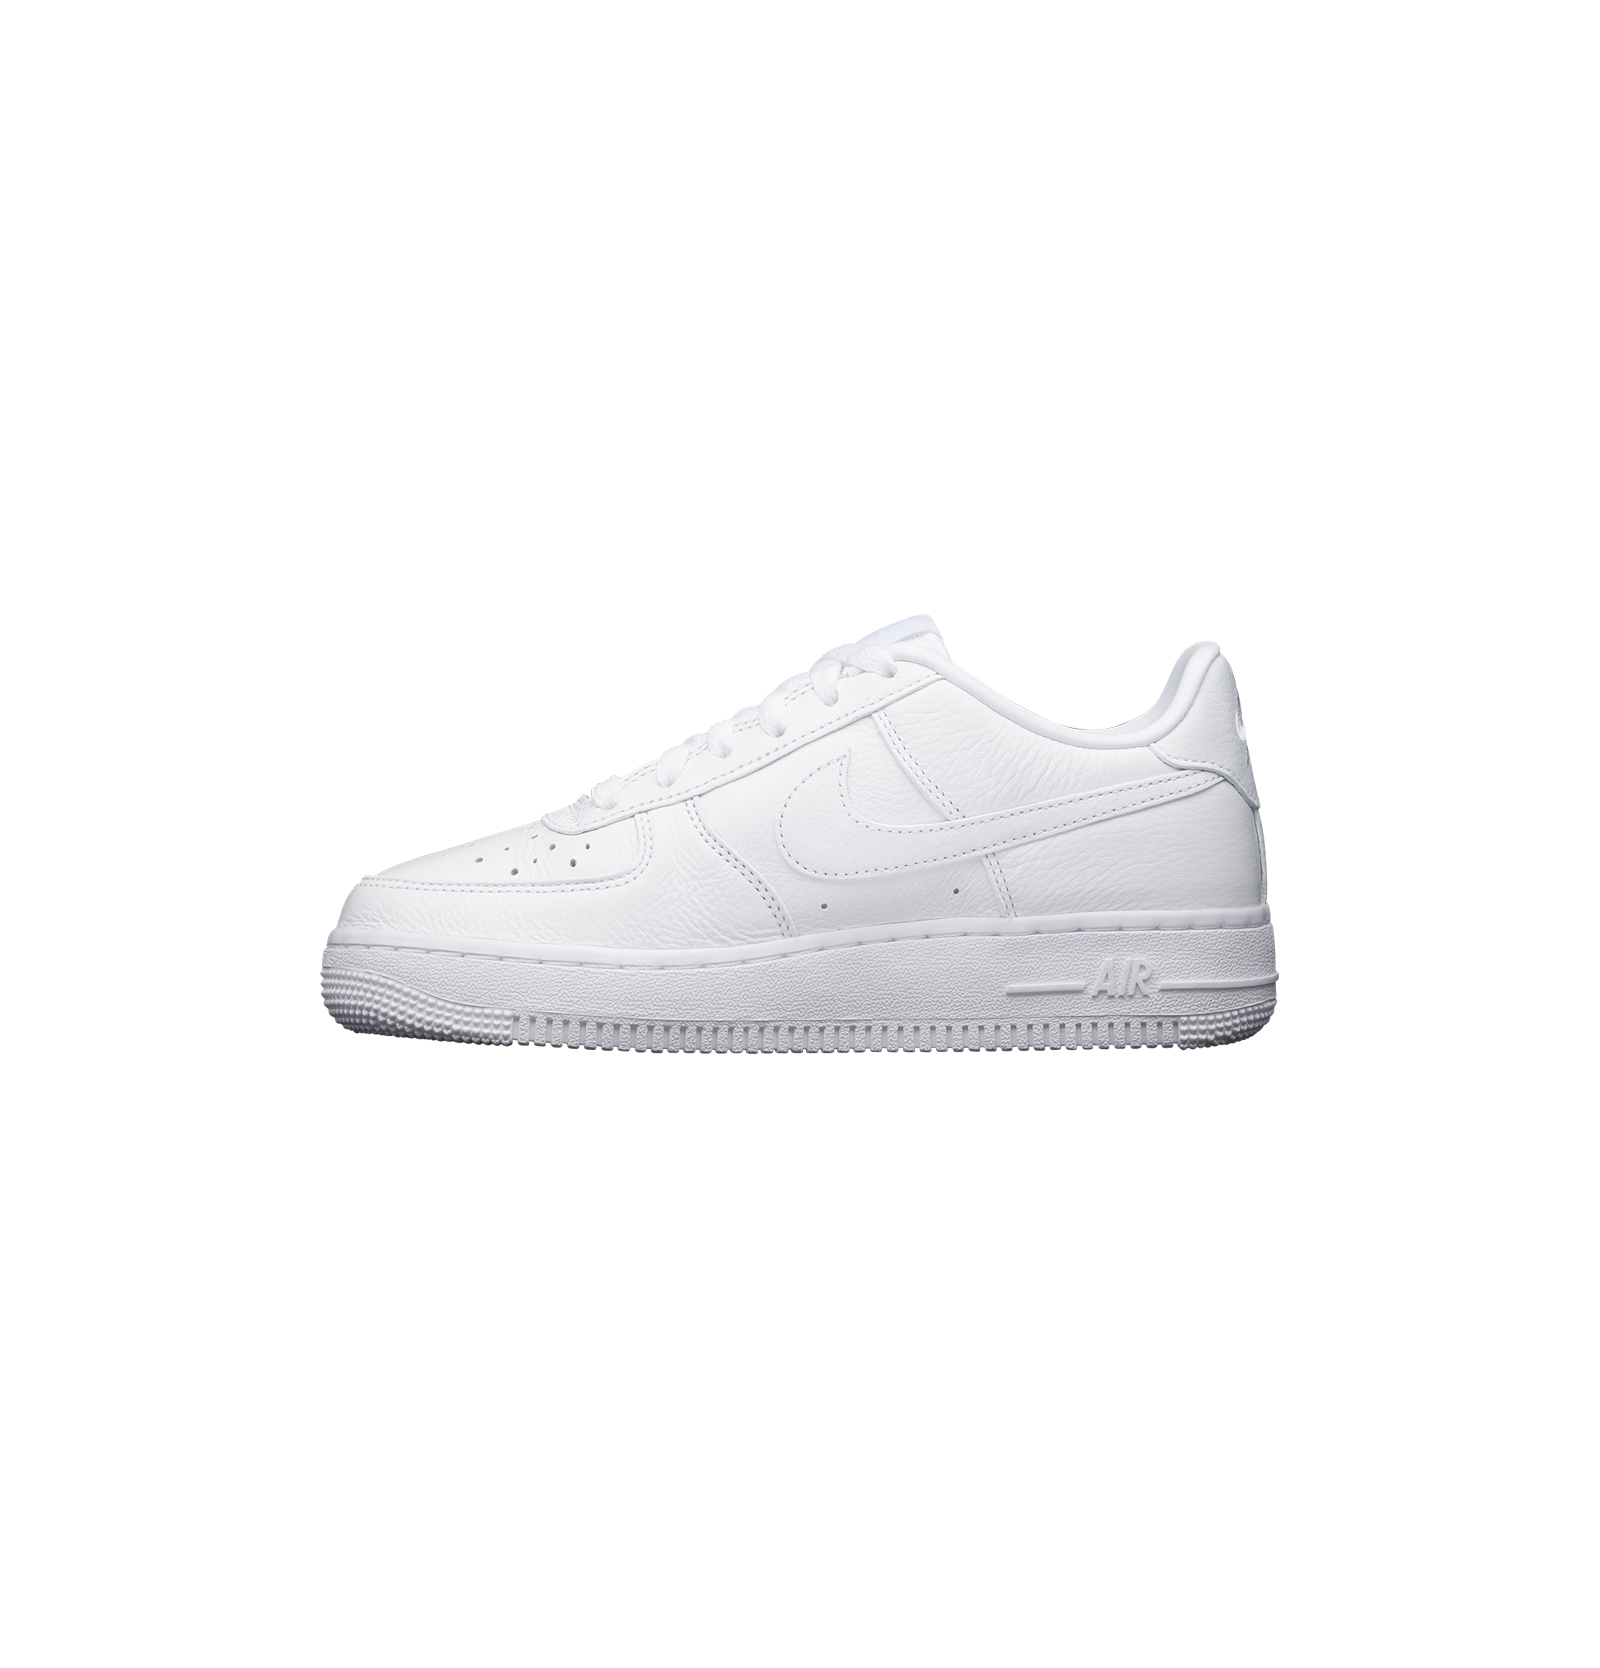 LOVE YOU FOREVER AIR FORCE 1 - BIG KIDS - IMAGE 5